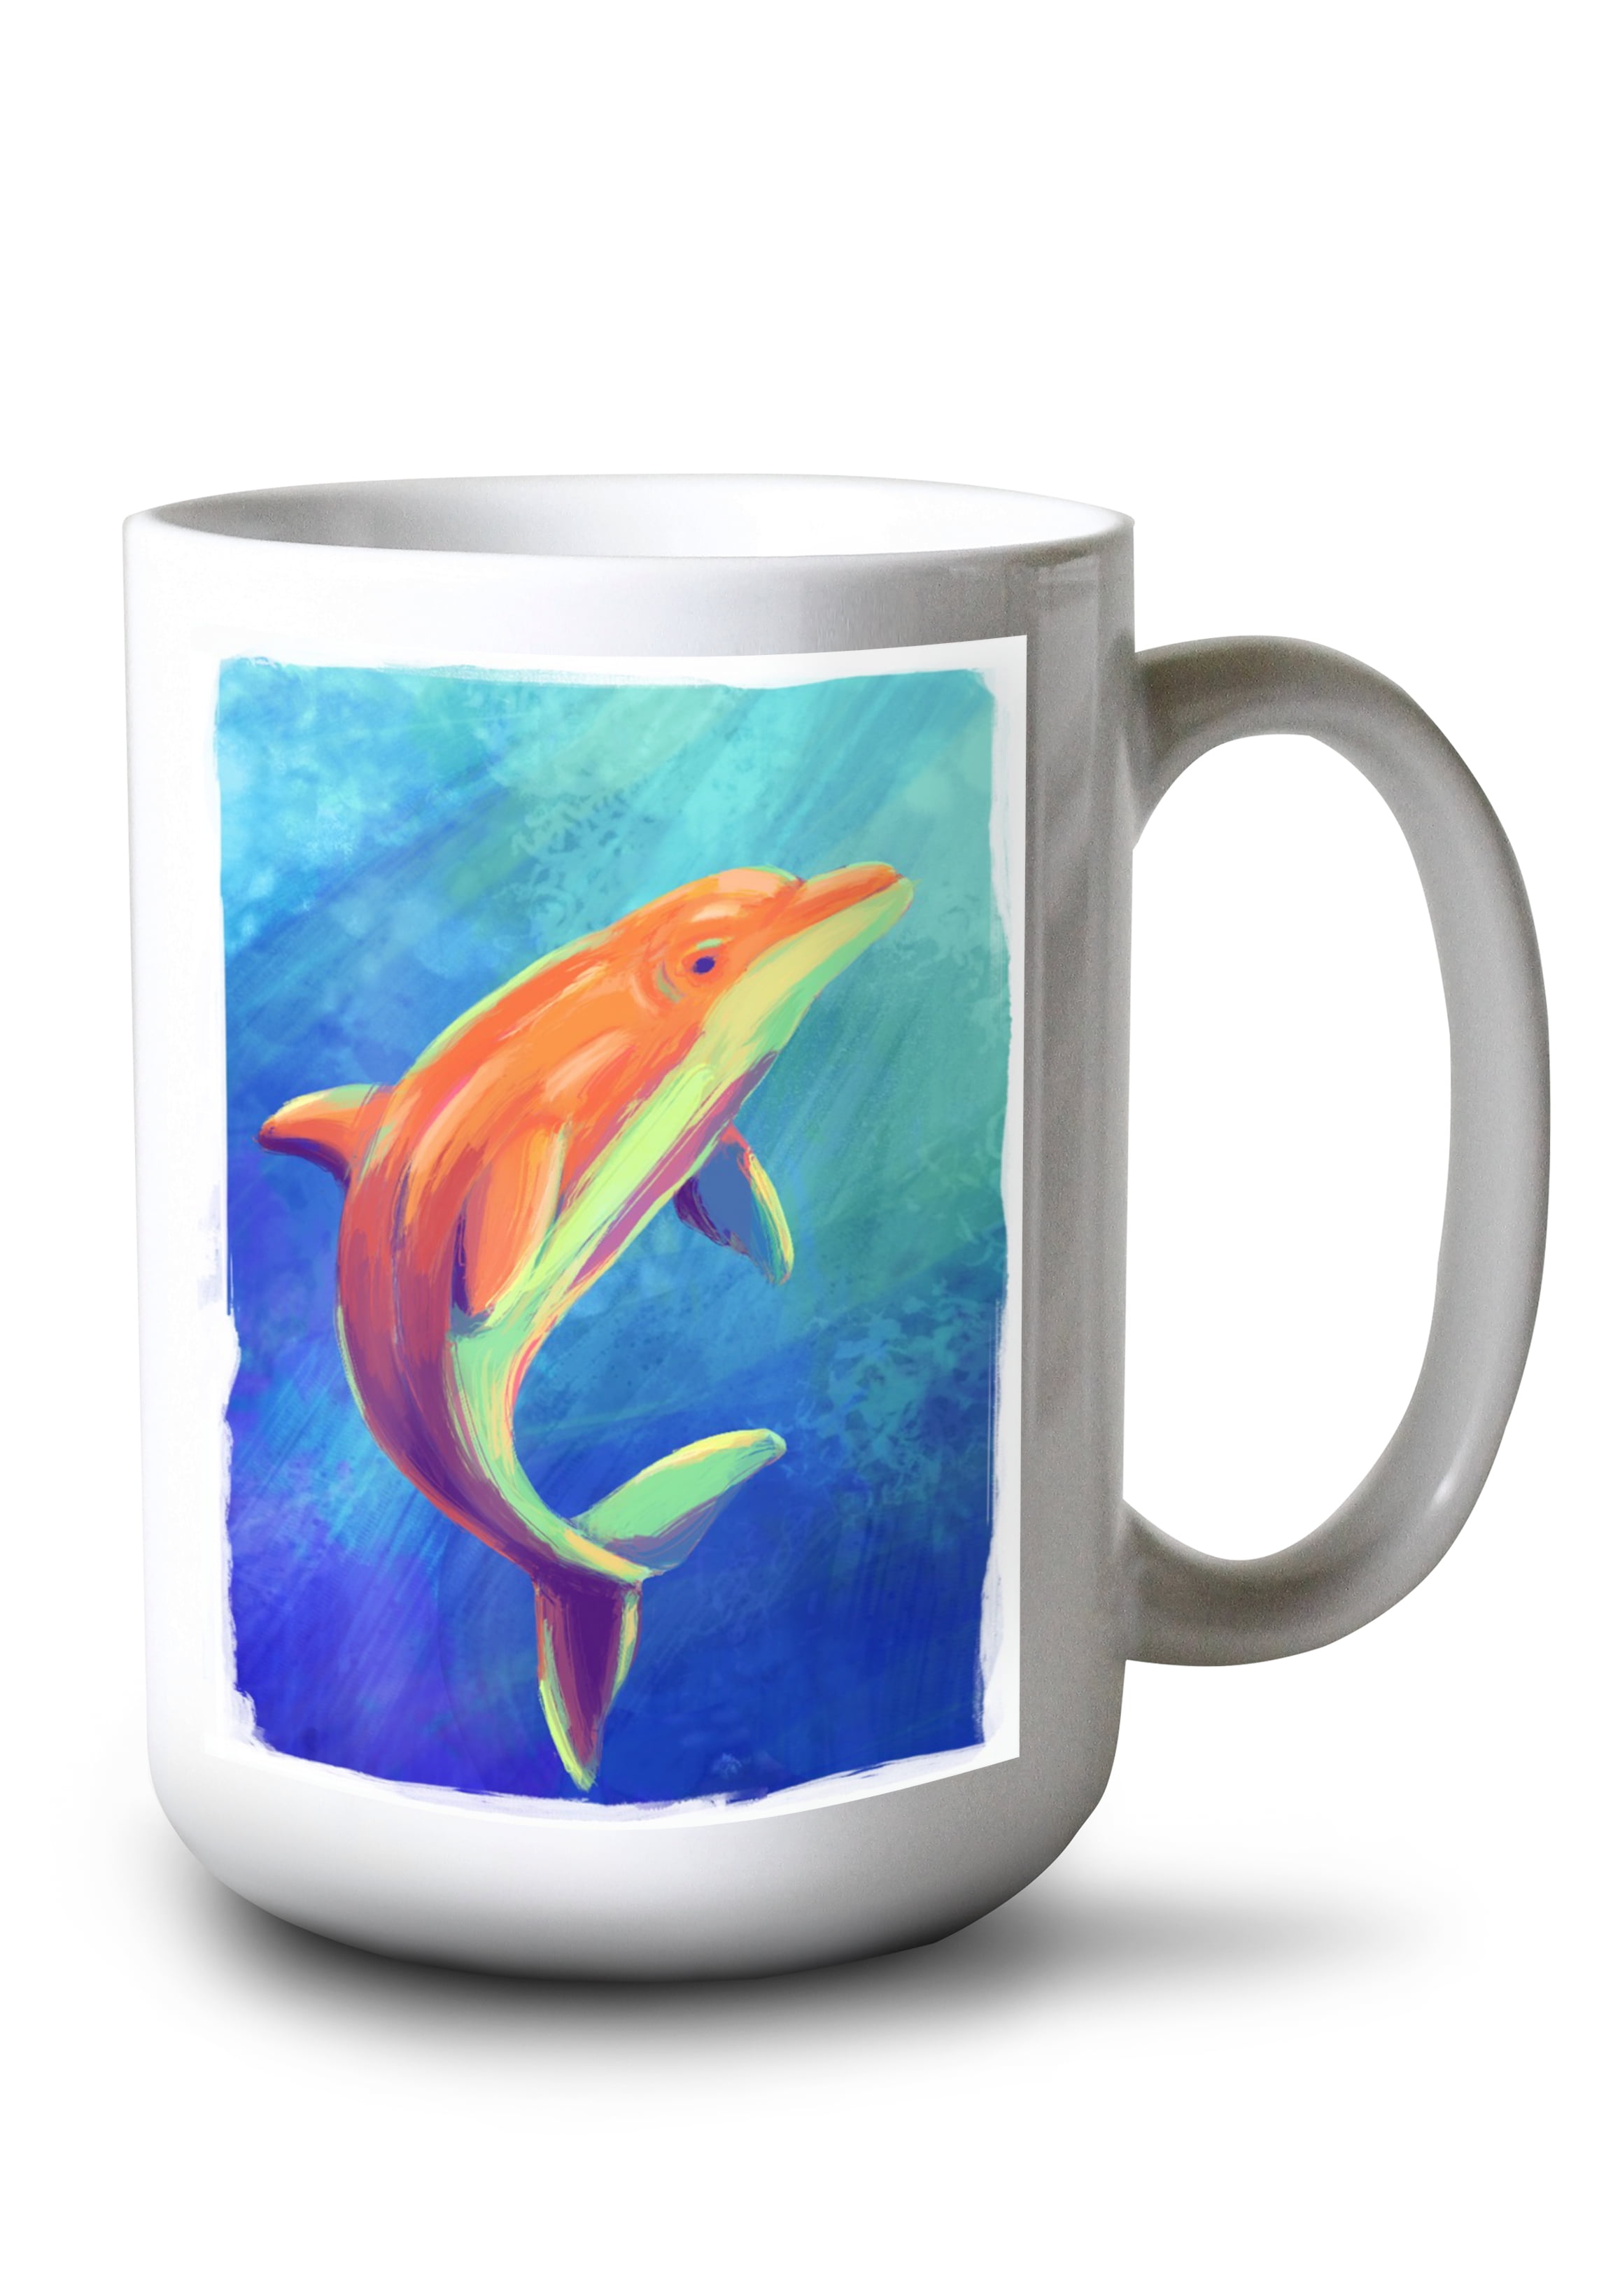 NOVELTY 3D LEAPING DOLPHIN DESIGN HANDLE COFFEE MUG TEA CUP NEW IN GIFT BOX 